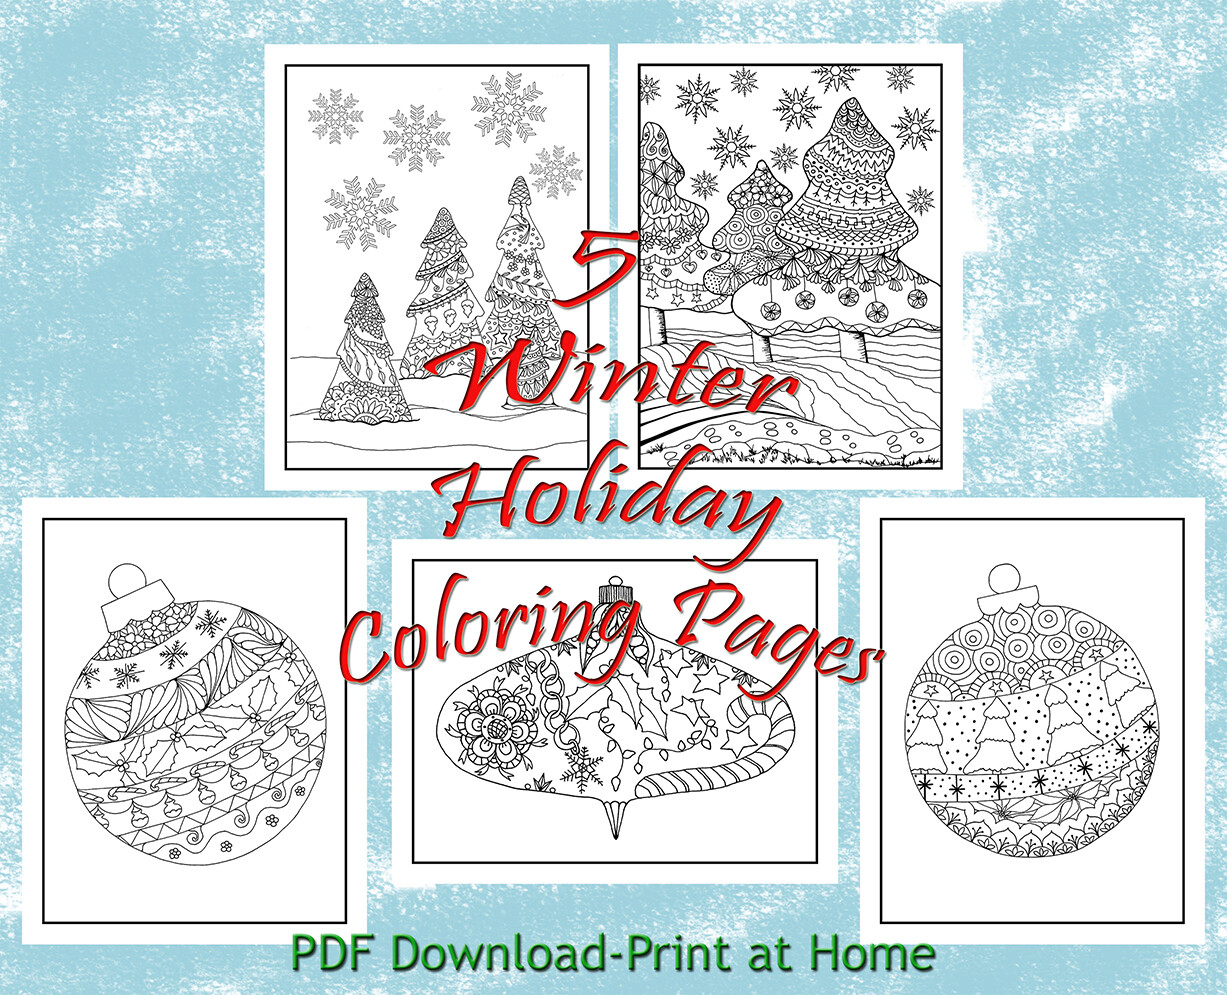 5 Winter Holiday Page Bundle to Color | Trees | Ornaments | For Adults and Kids